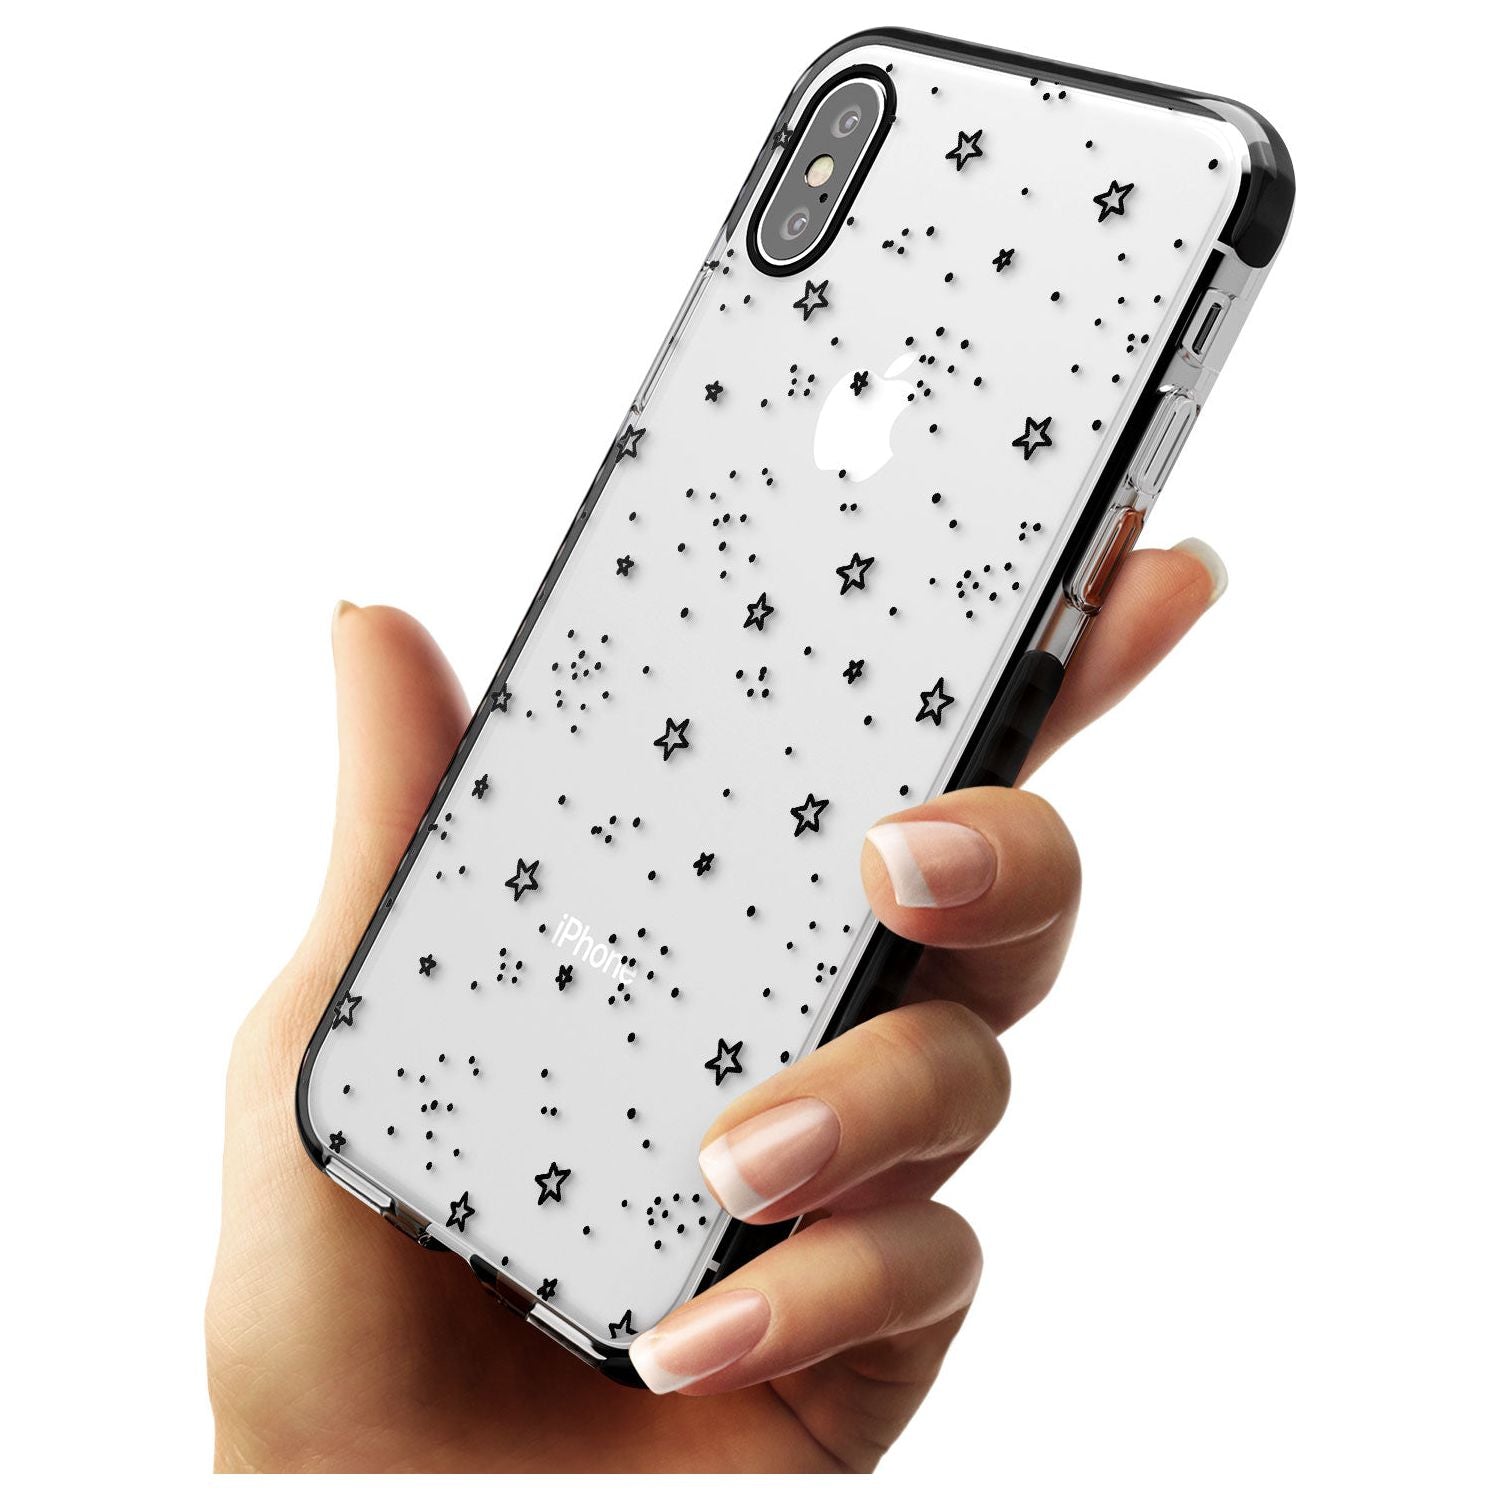 Star Outlines Black Impact Phone Case for iPhone X XS Max XR